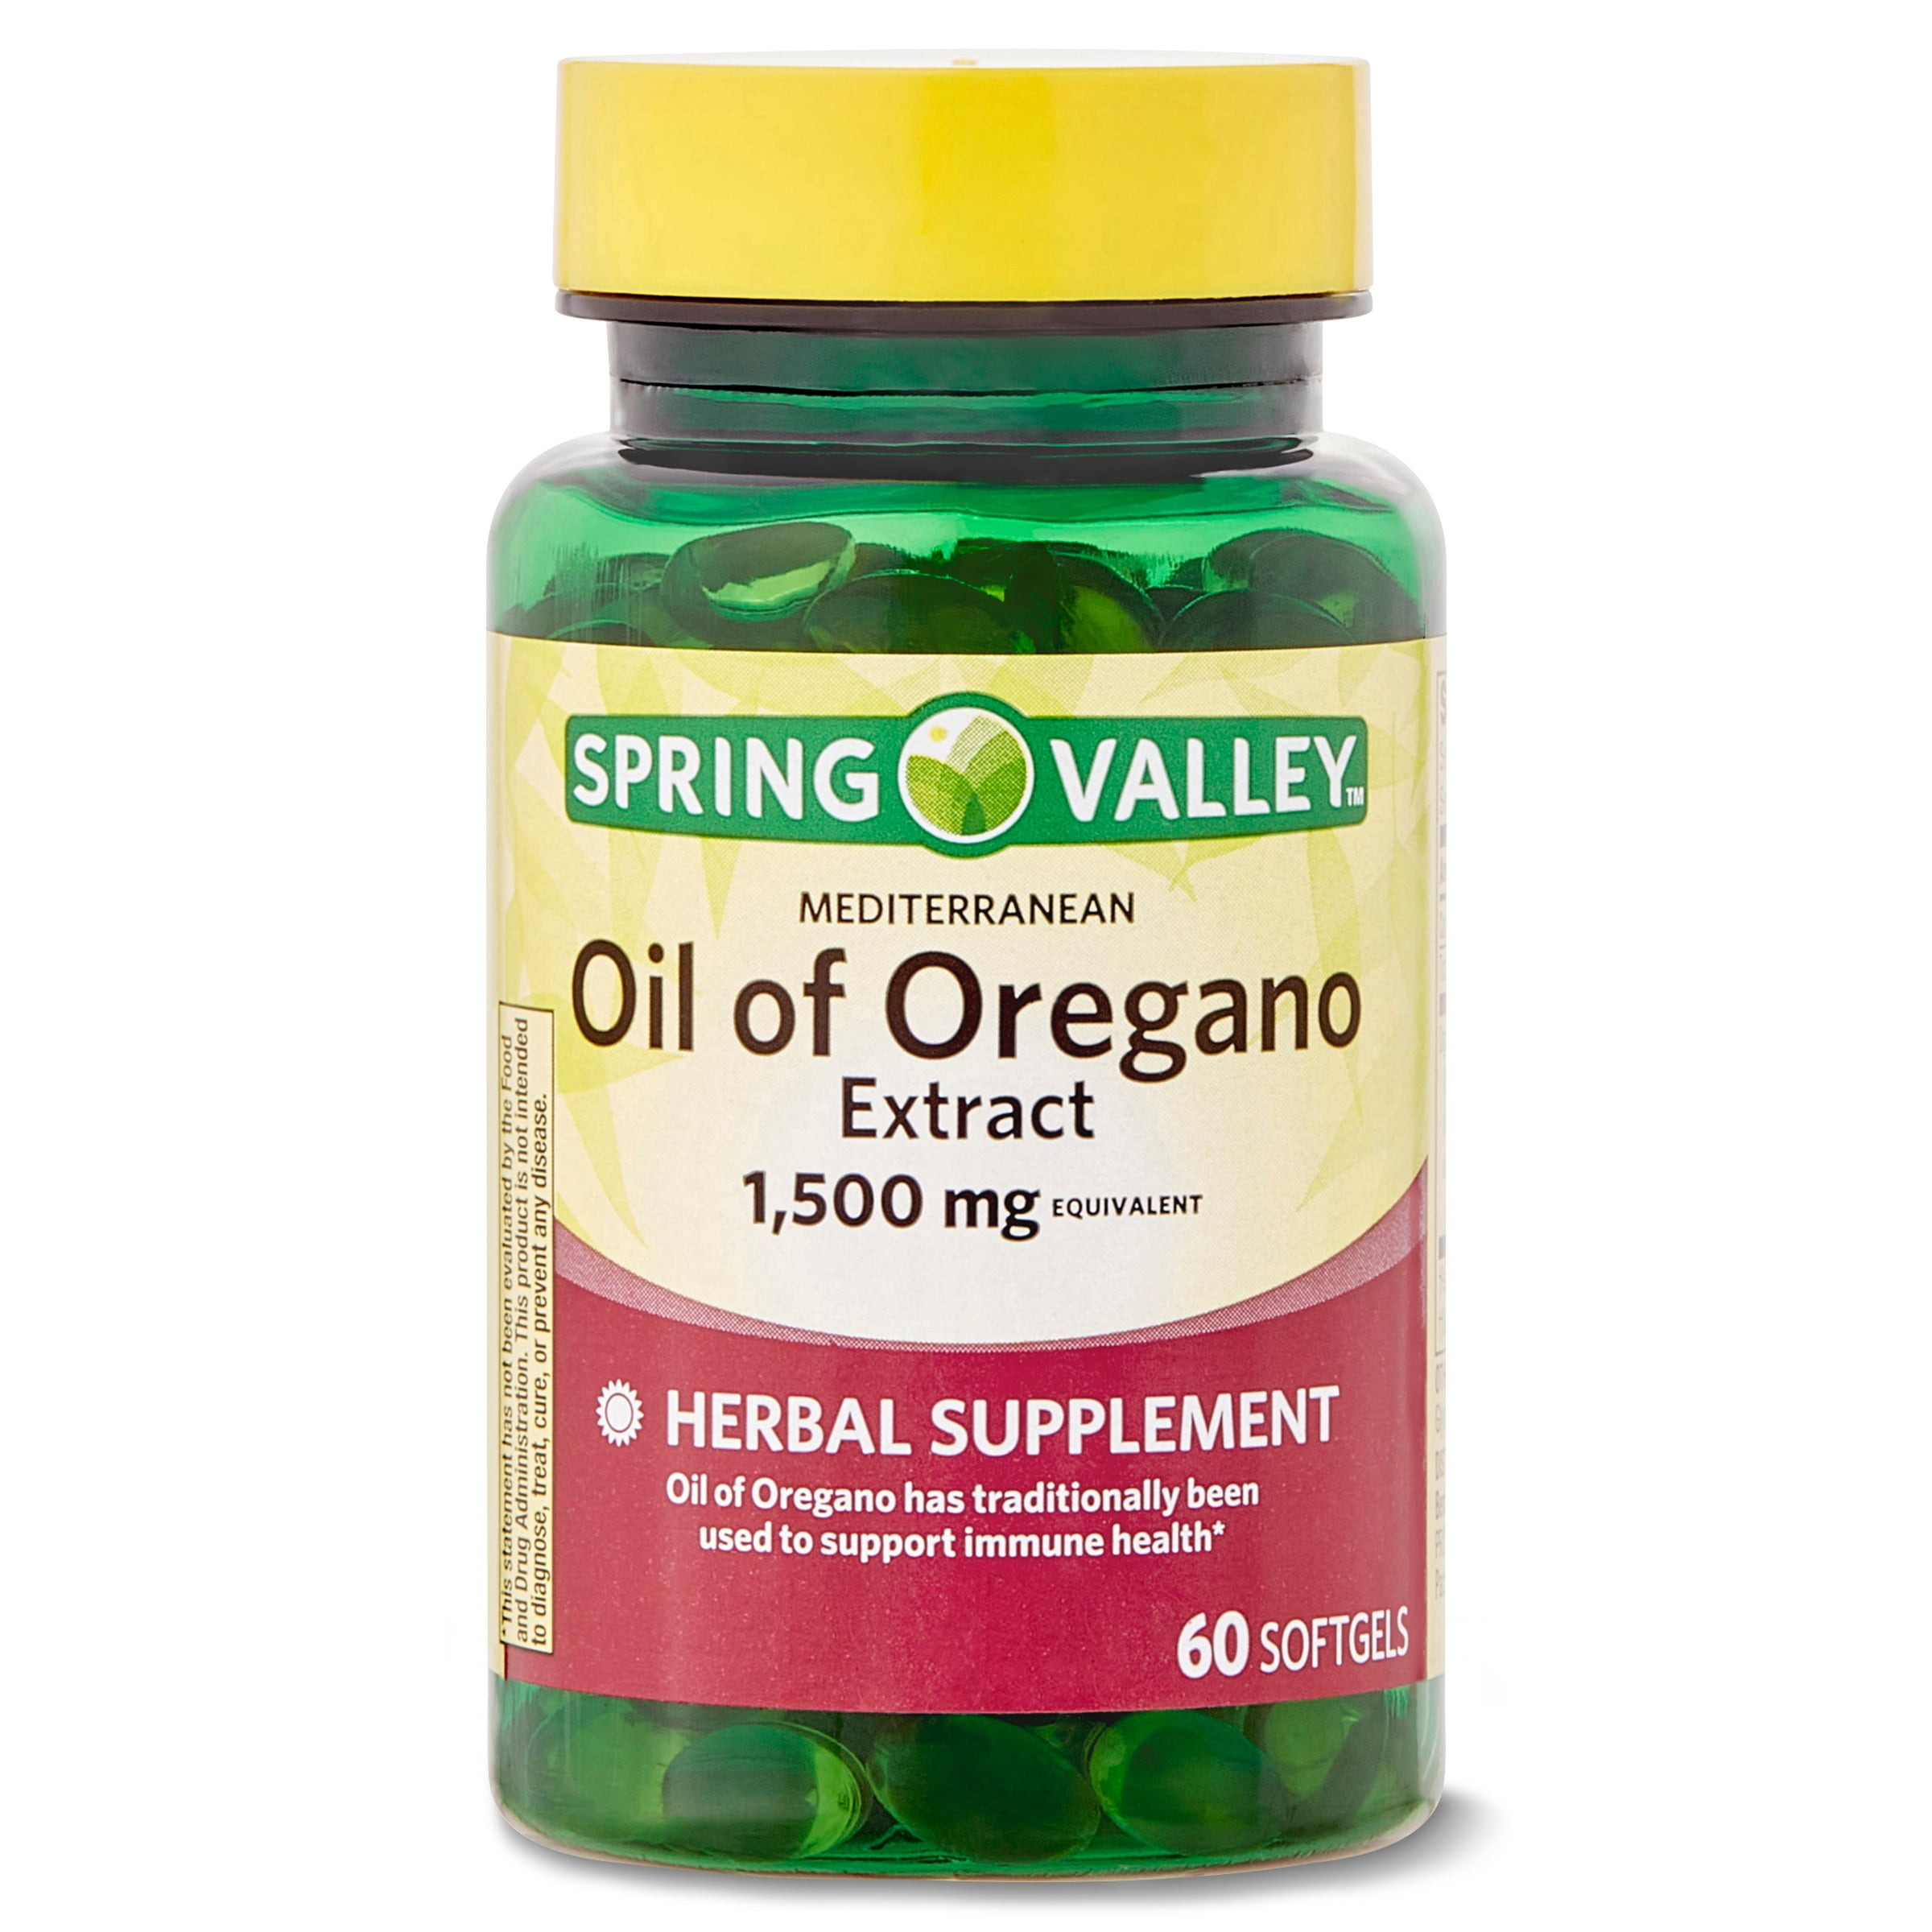 Spring Valley Mediterranean Oil of Oregano Extract, Herbal Supplement, 1,500 mg, 60 Count Softgels Capsules